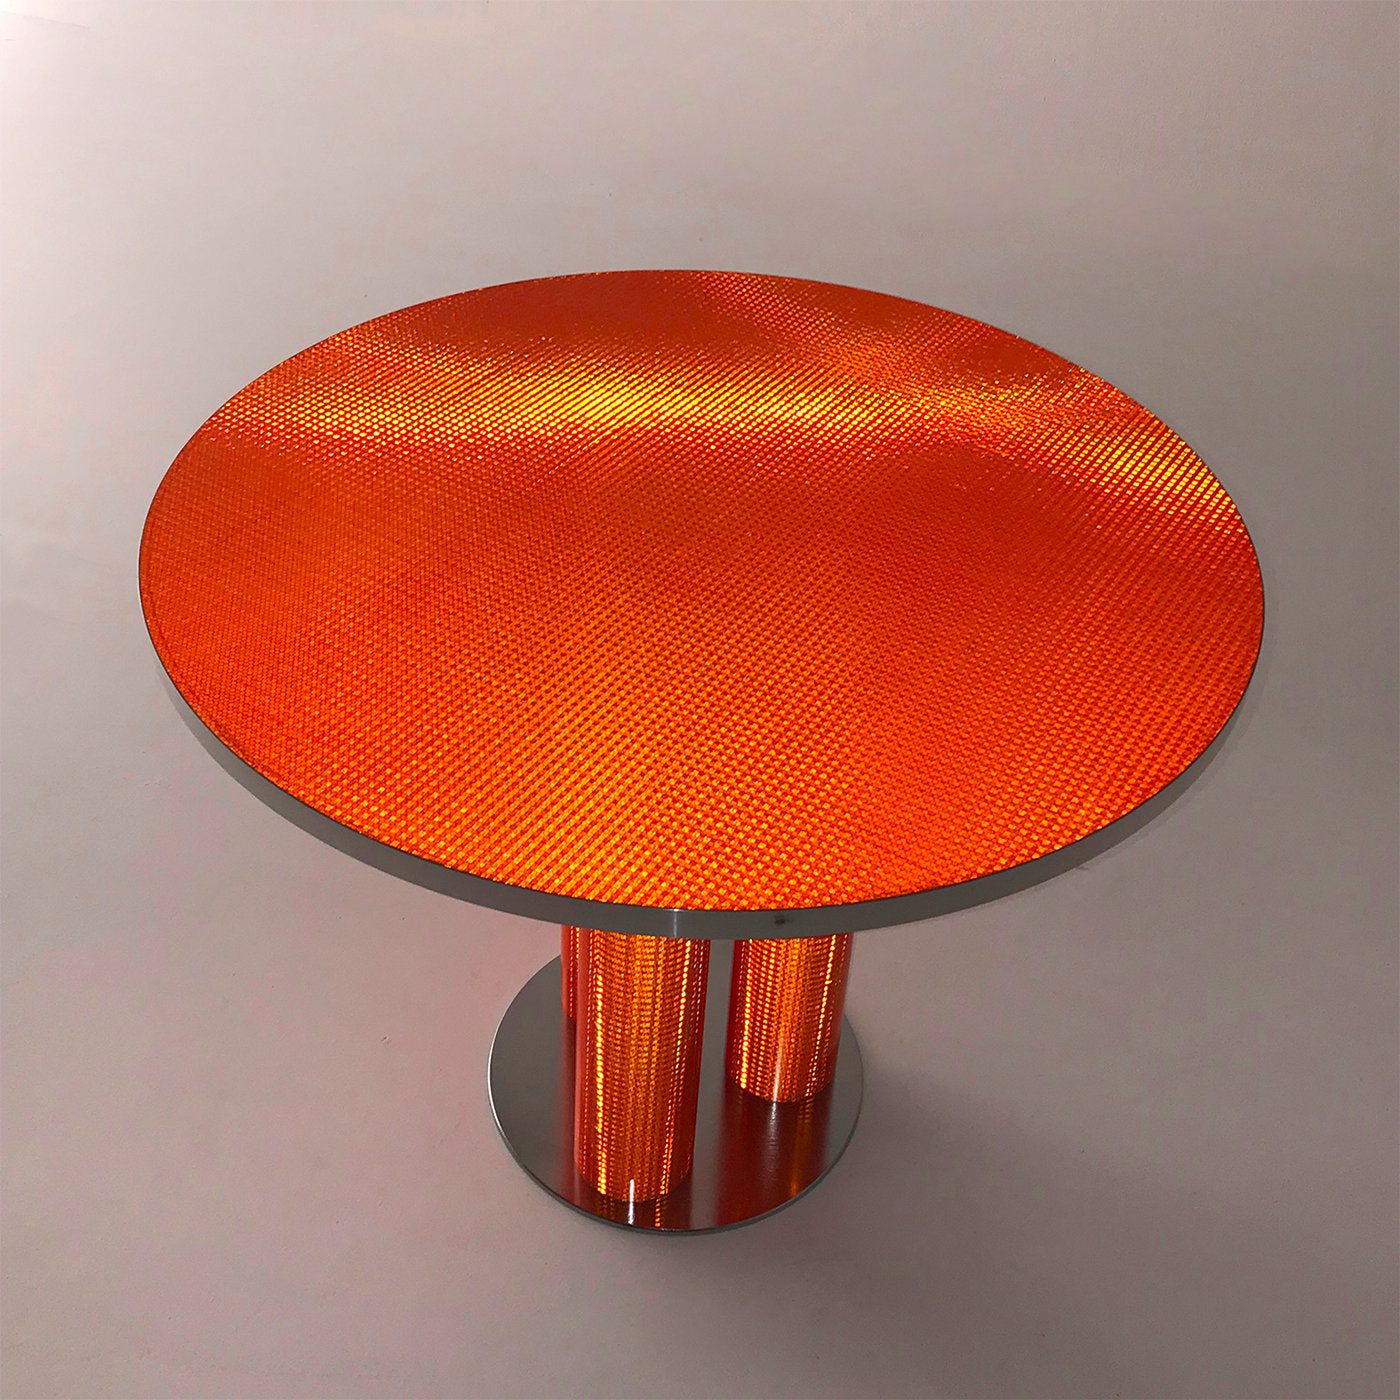 Reflective Collection - Red round coffee table - Alternative view 1